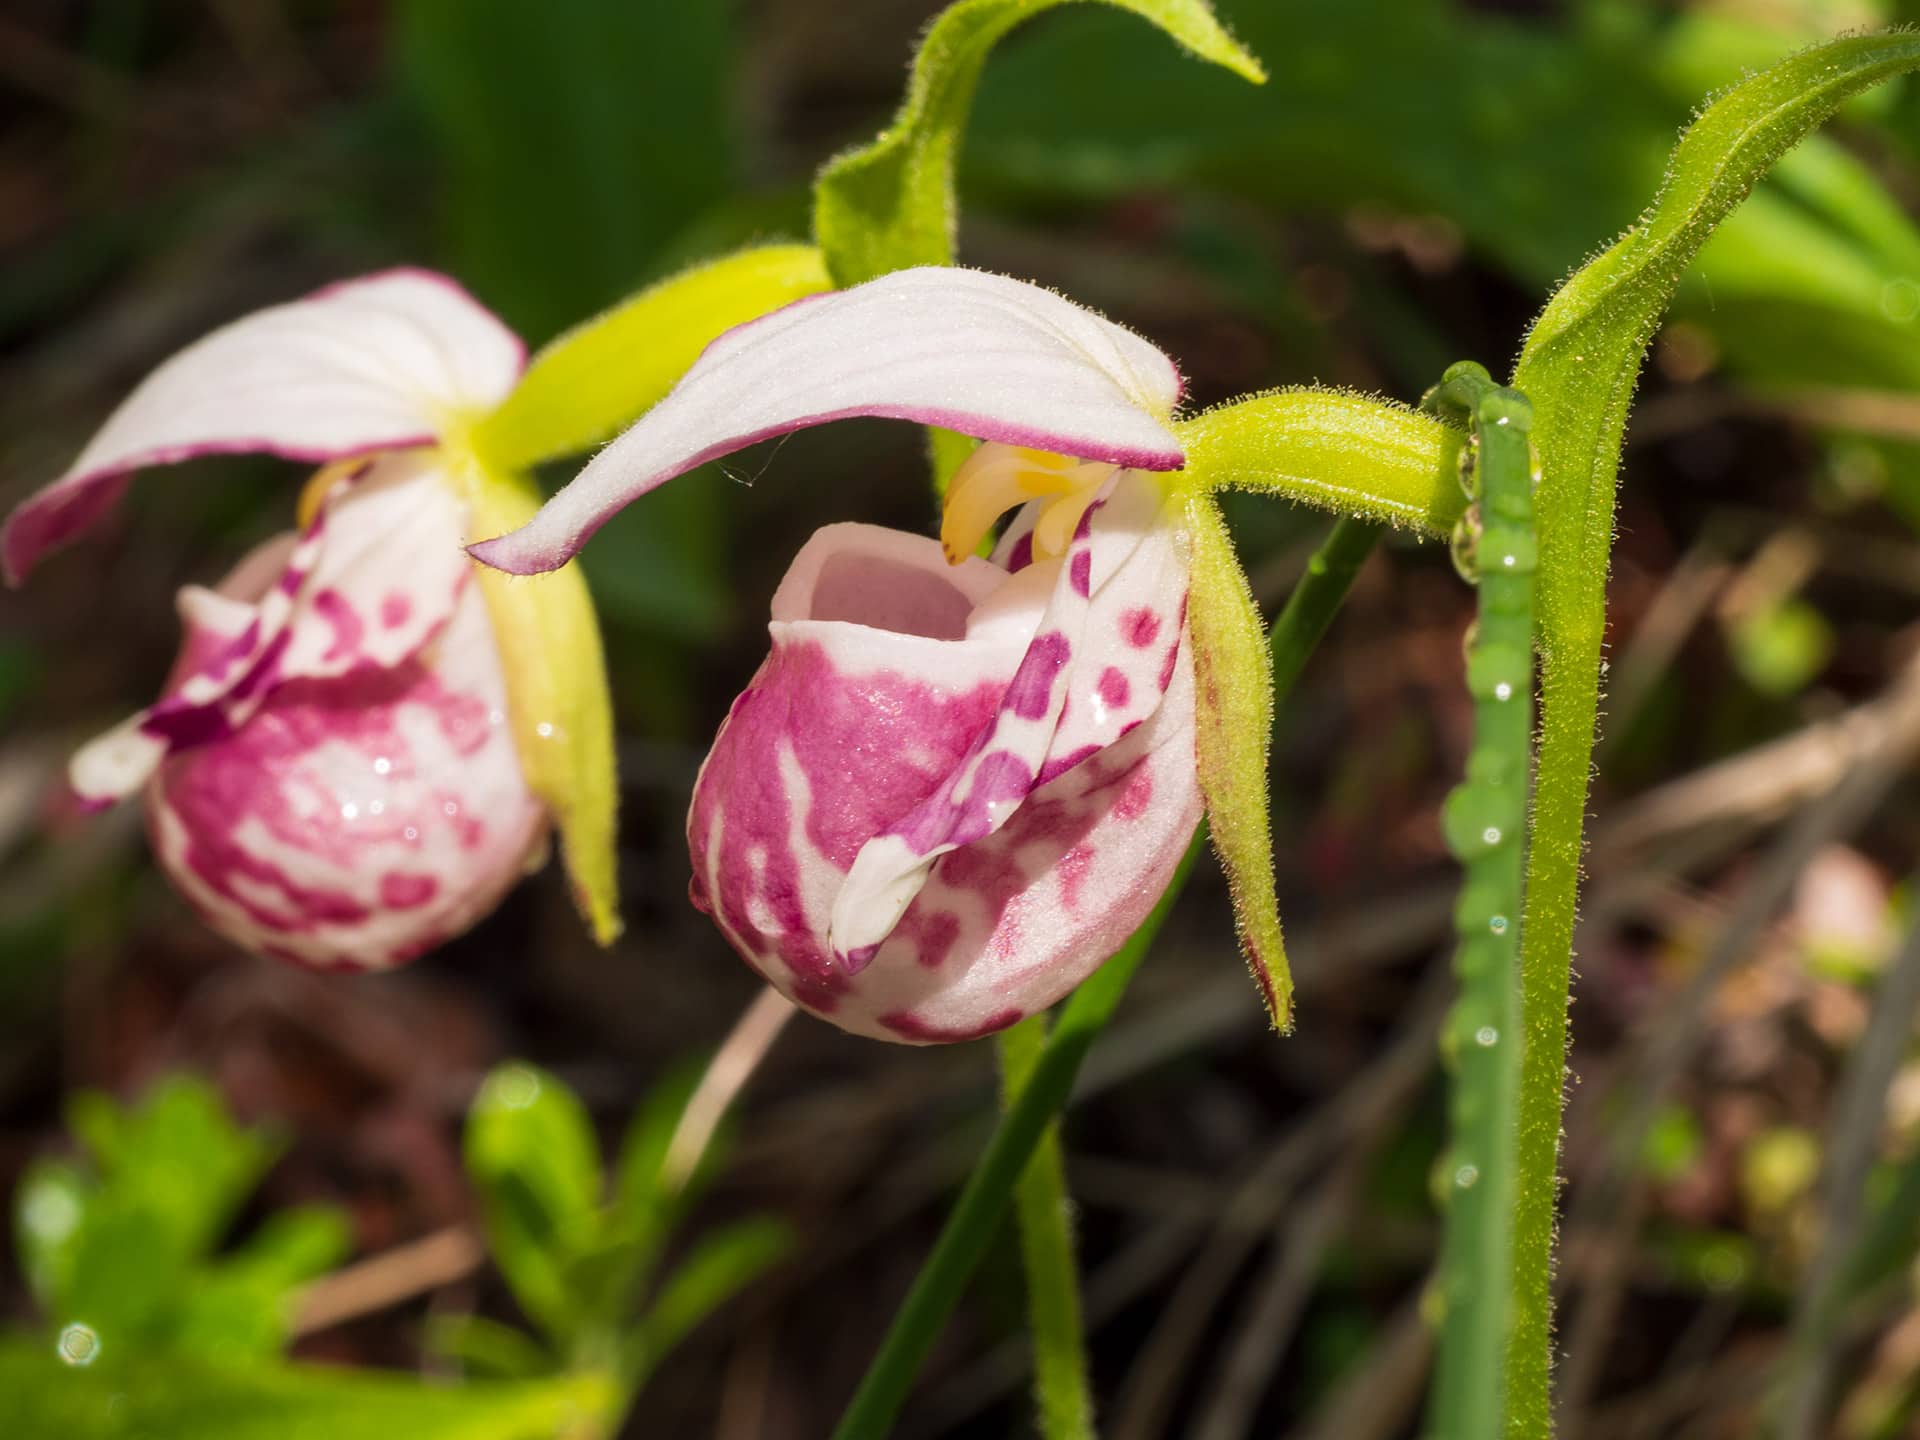 Erotic, alluring, rare...The Spotted Lady's Slipper orchid